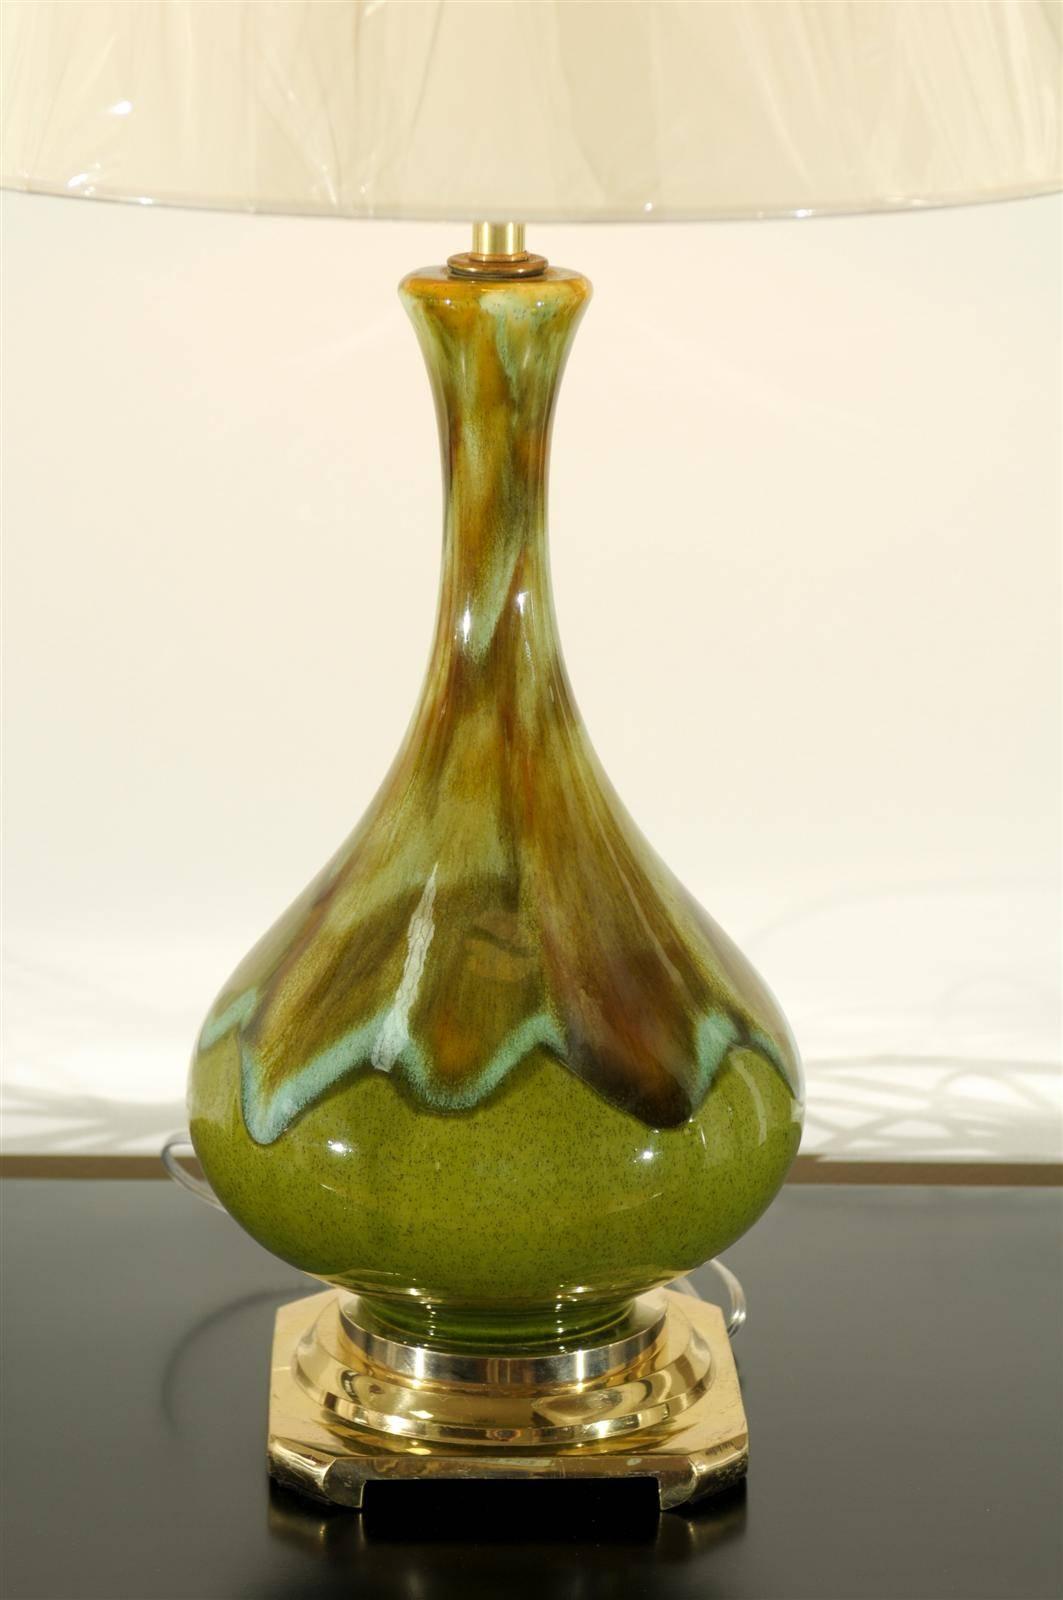 Exceptional Pair of Ceramic Lamps in Apple Green, Robins Egg and Caramel In Excellent Condition For Sale In Atlanta, GA